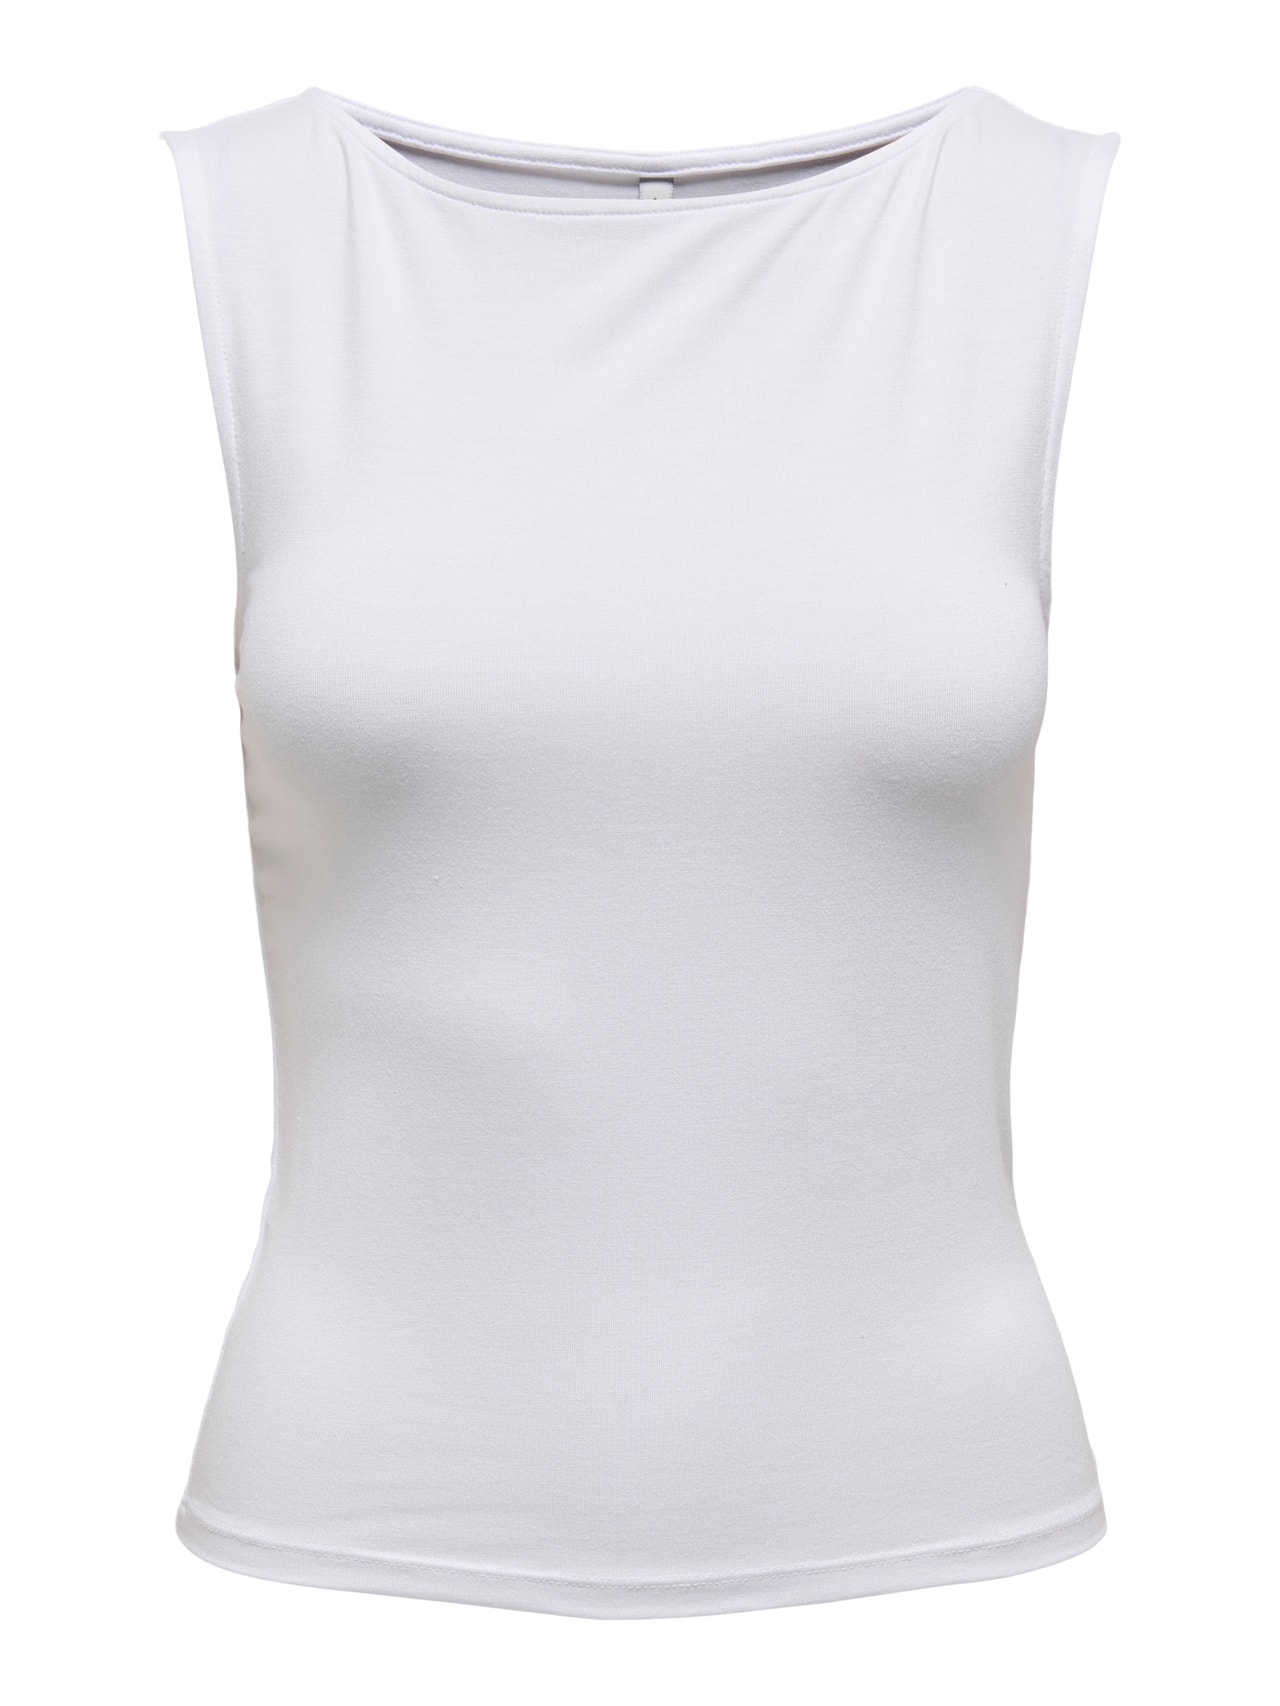 ONLY Top with boat neck -White - 15336196